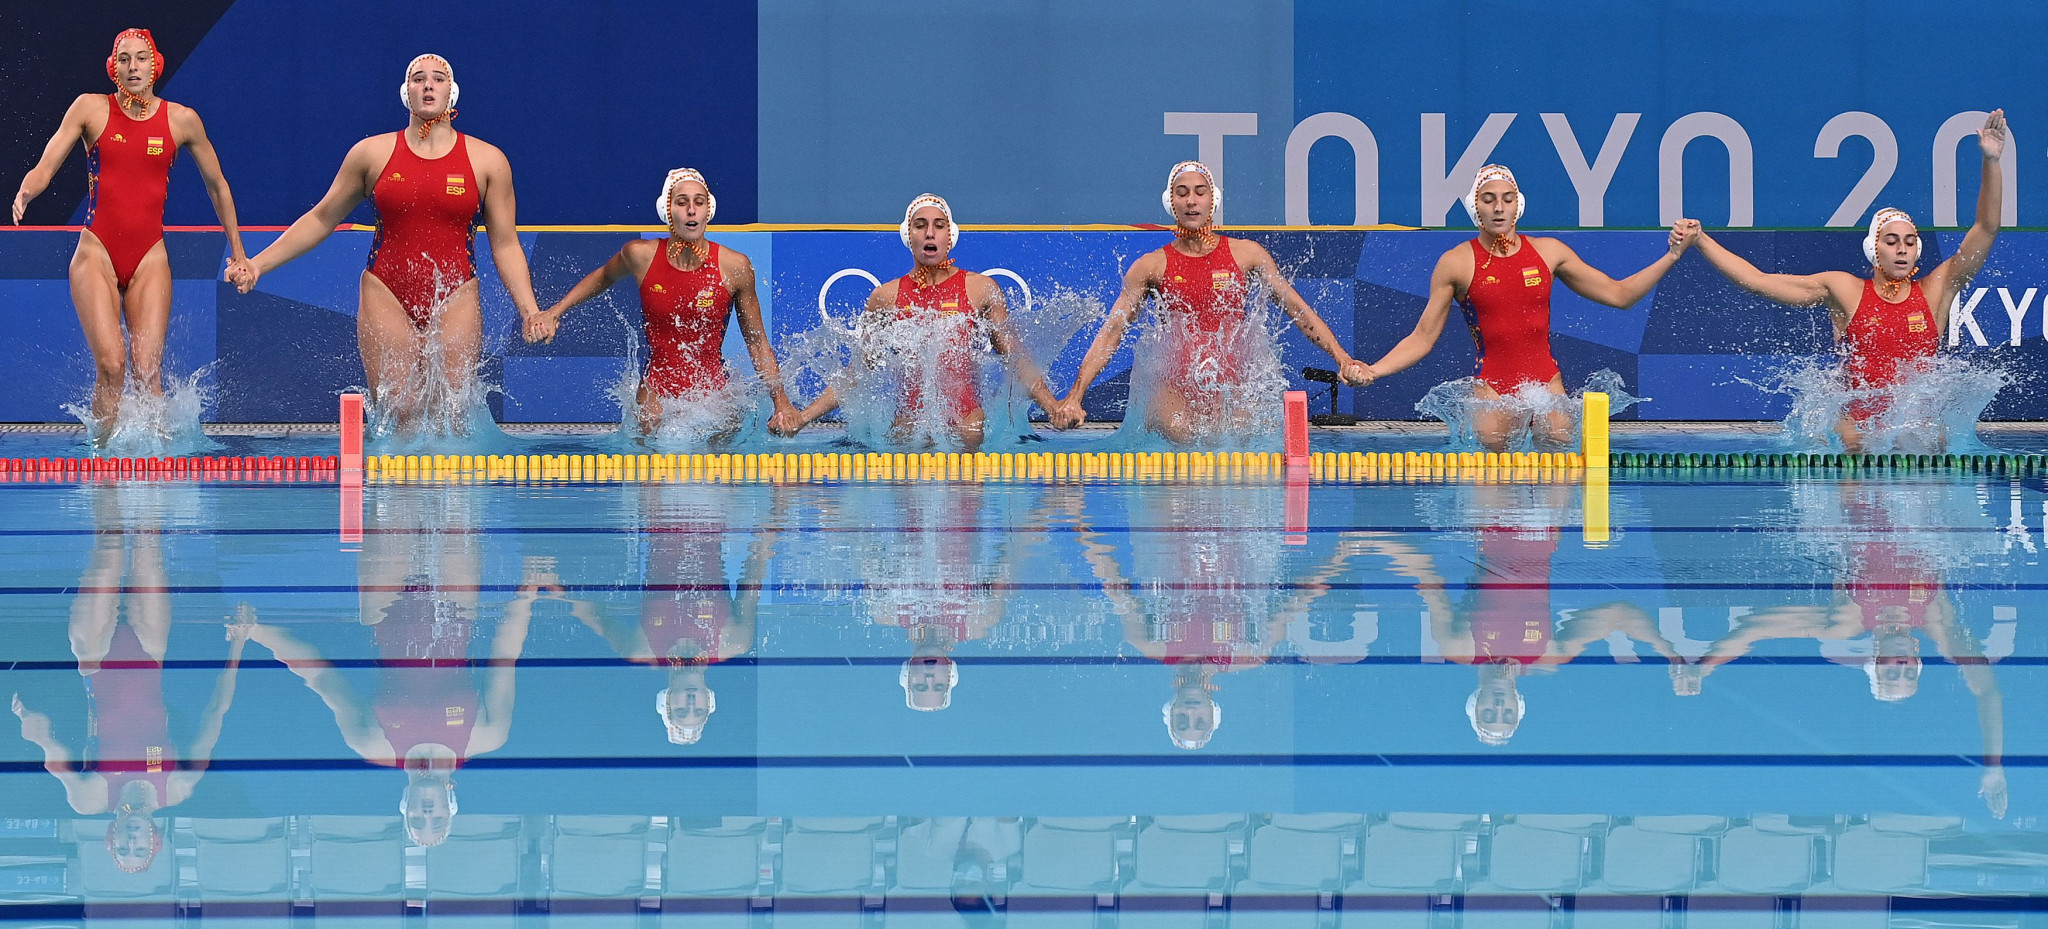 Spain's women's team are seeking back-to-back water polo titles ©Getty Images